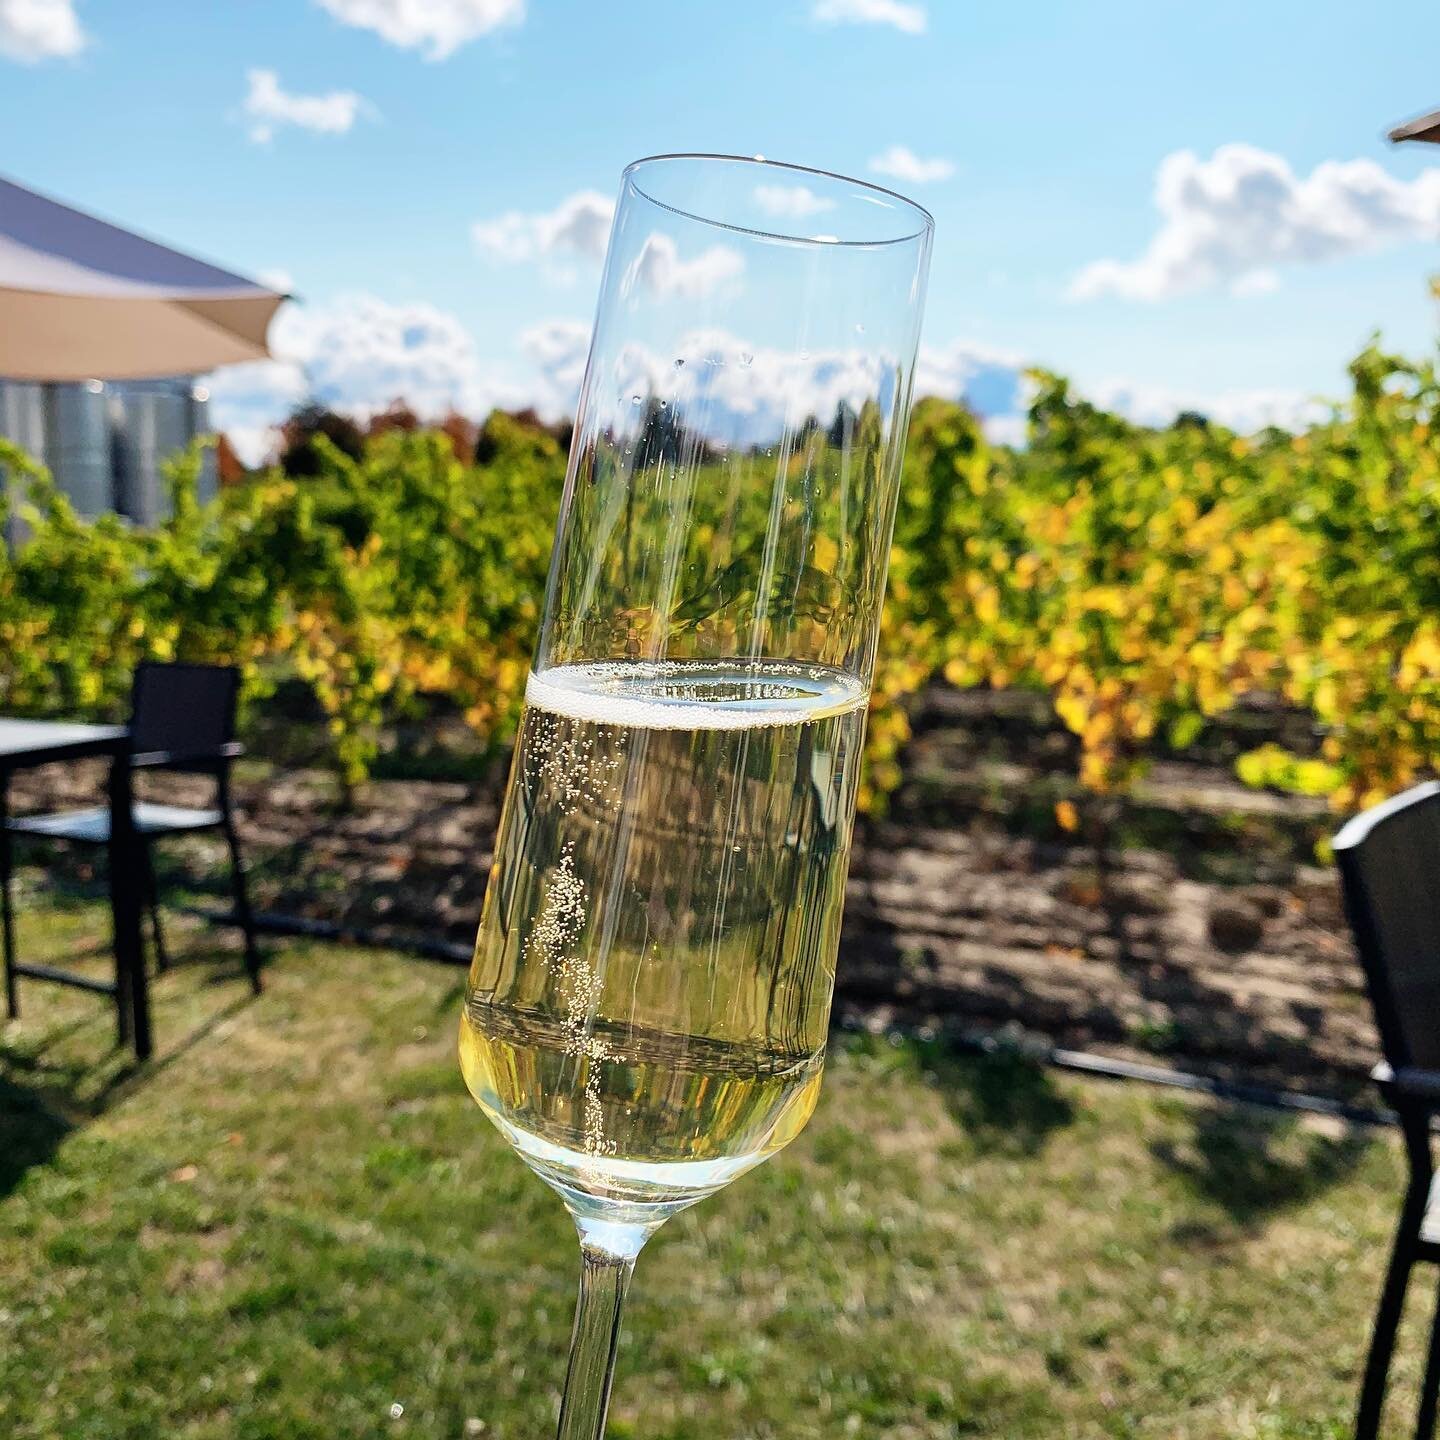 T-minus 1 week until I&rsquo;m back in the Finger Lakes!! Did you think I&rsquo;d miss @flxcursion ?! Please! 🥂😉
&hellip;
&hellip;
&hellip;
&hellip;
&hellip;
🏷 #fingerlakes #riesling #winegeek #flxwine #iloveny #newyorkwine #wineblog #vineyard #vi